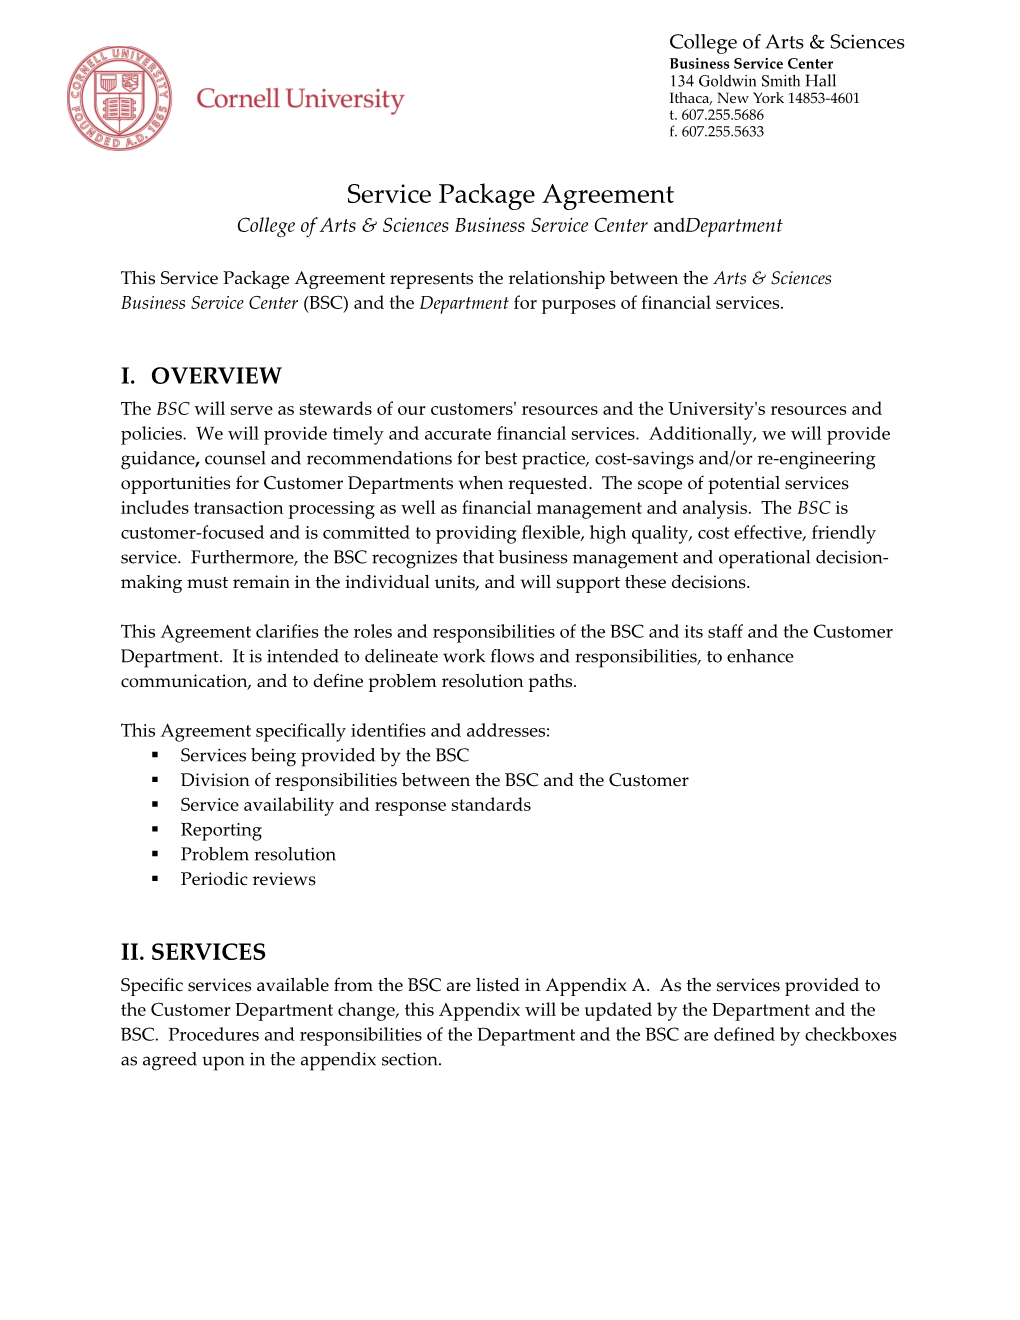 Service Package Agreement